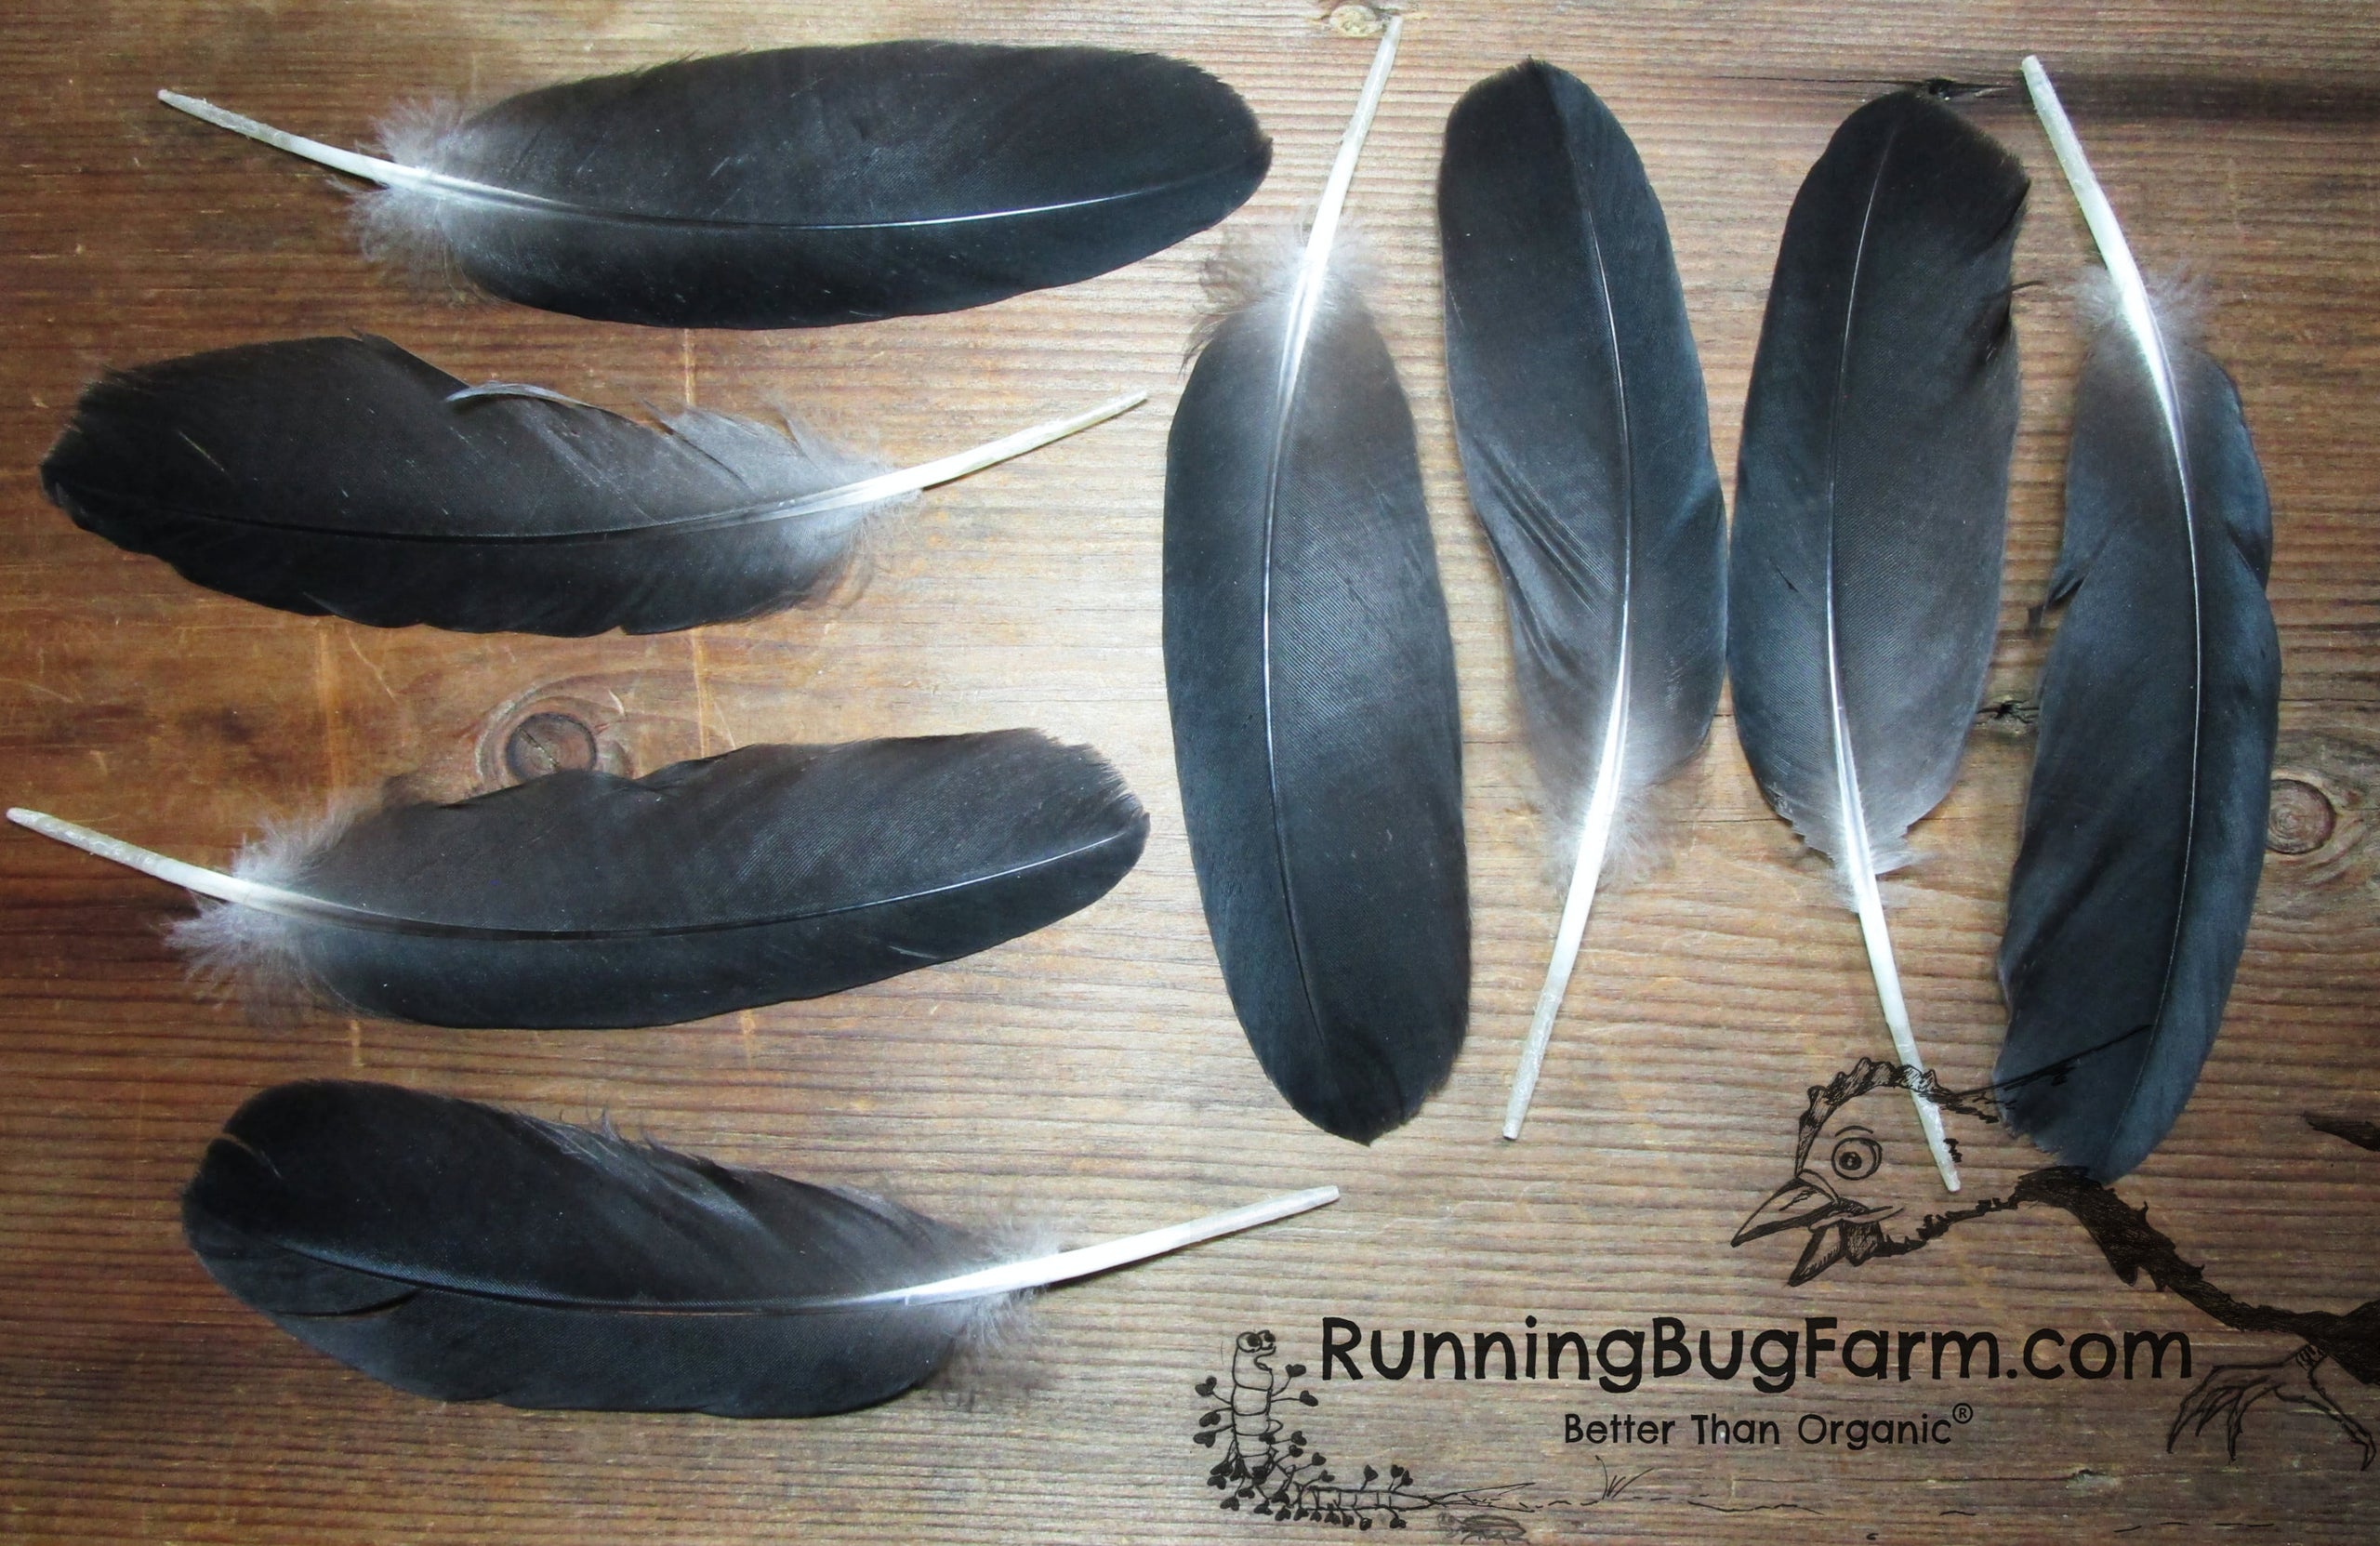 5-7 Inch Blue Goose Feathers. 10 Blue Bird Feathers. Stiff